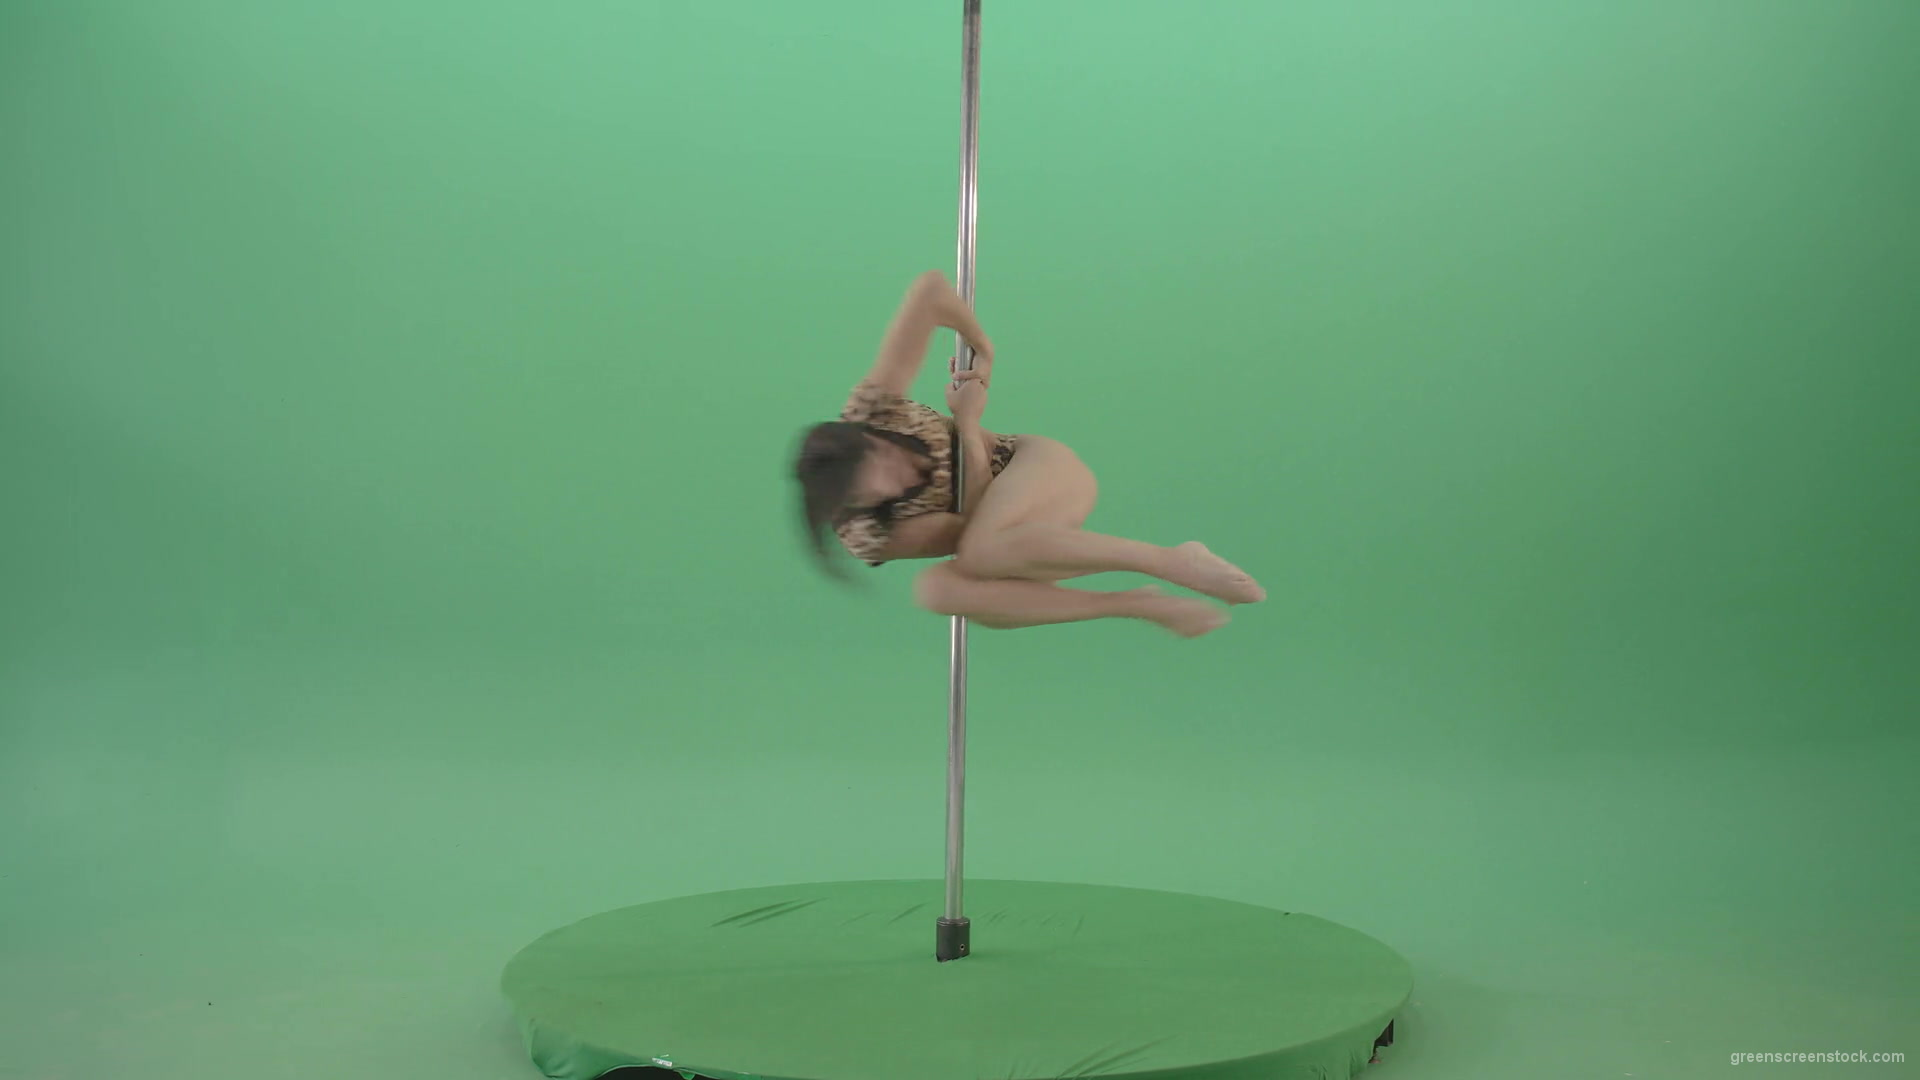 Gymnast-Girl-in-leopard-animal-underwear-spinning-fast-in-pole-dance-isolated-on-Green-Screen-4K-Video-Footage-1920_006 Green Screen Stock